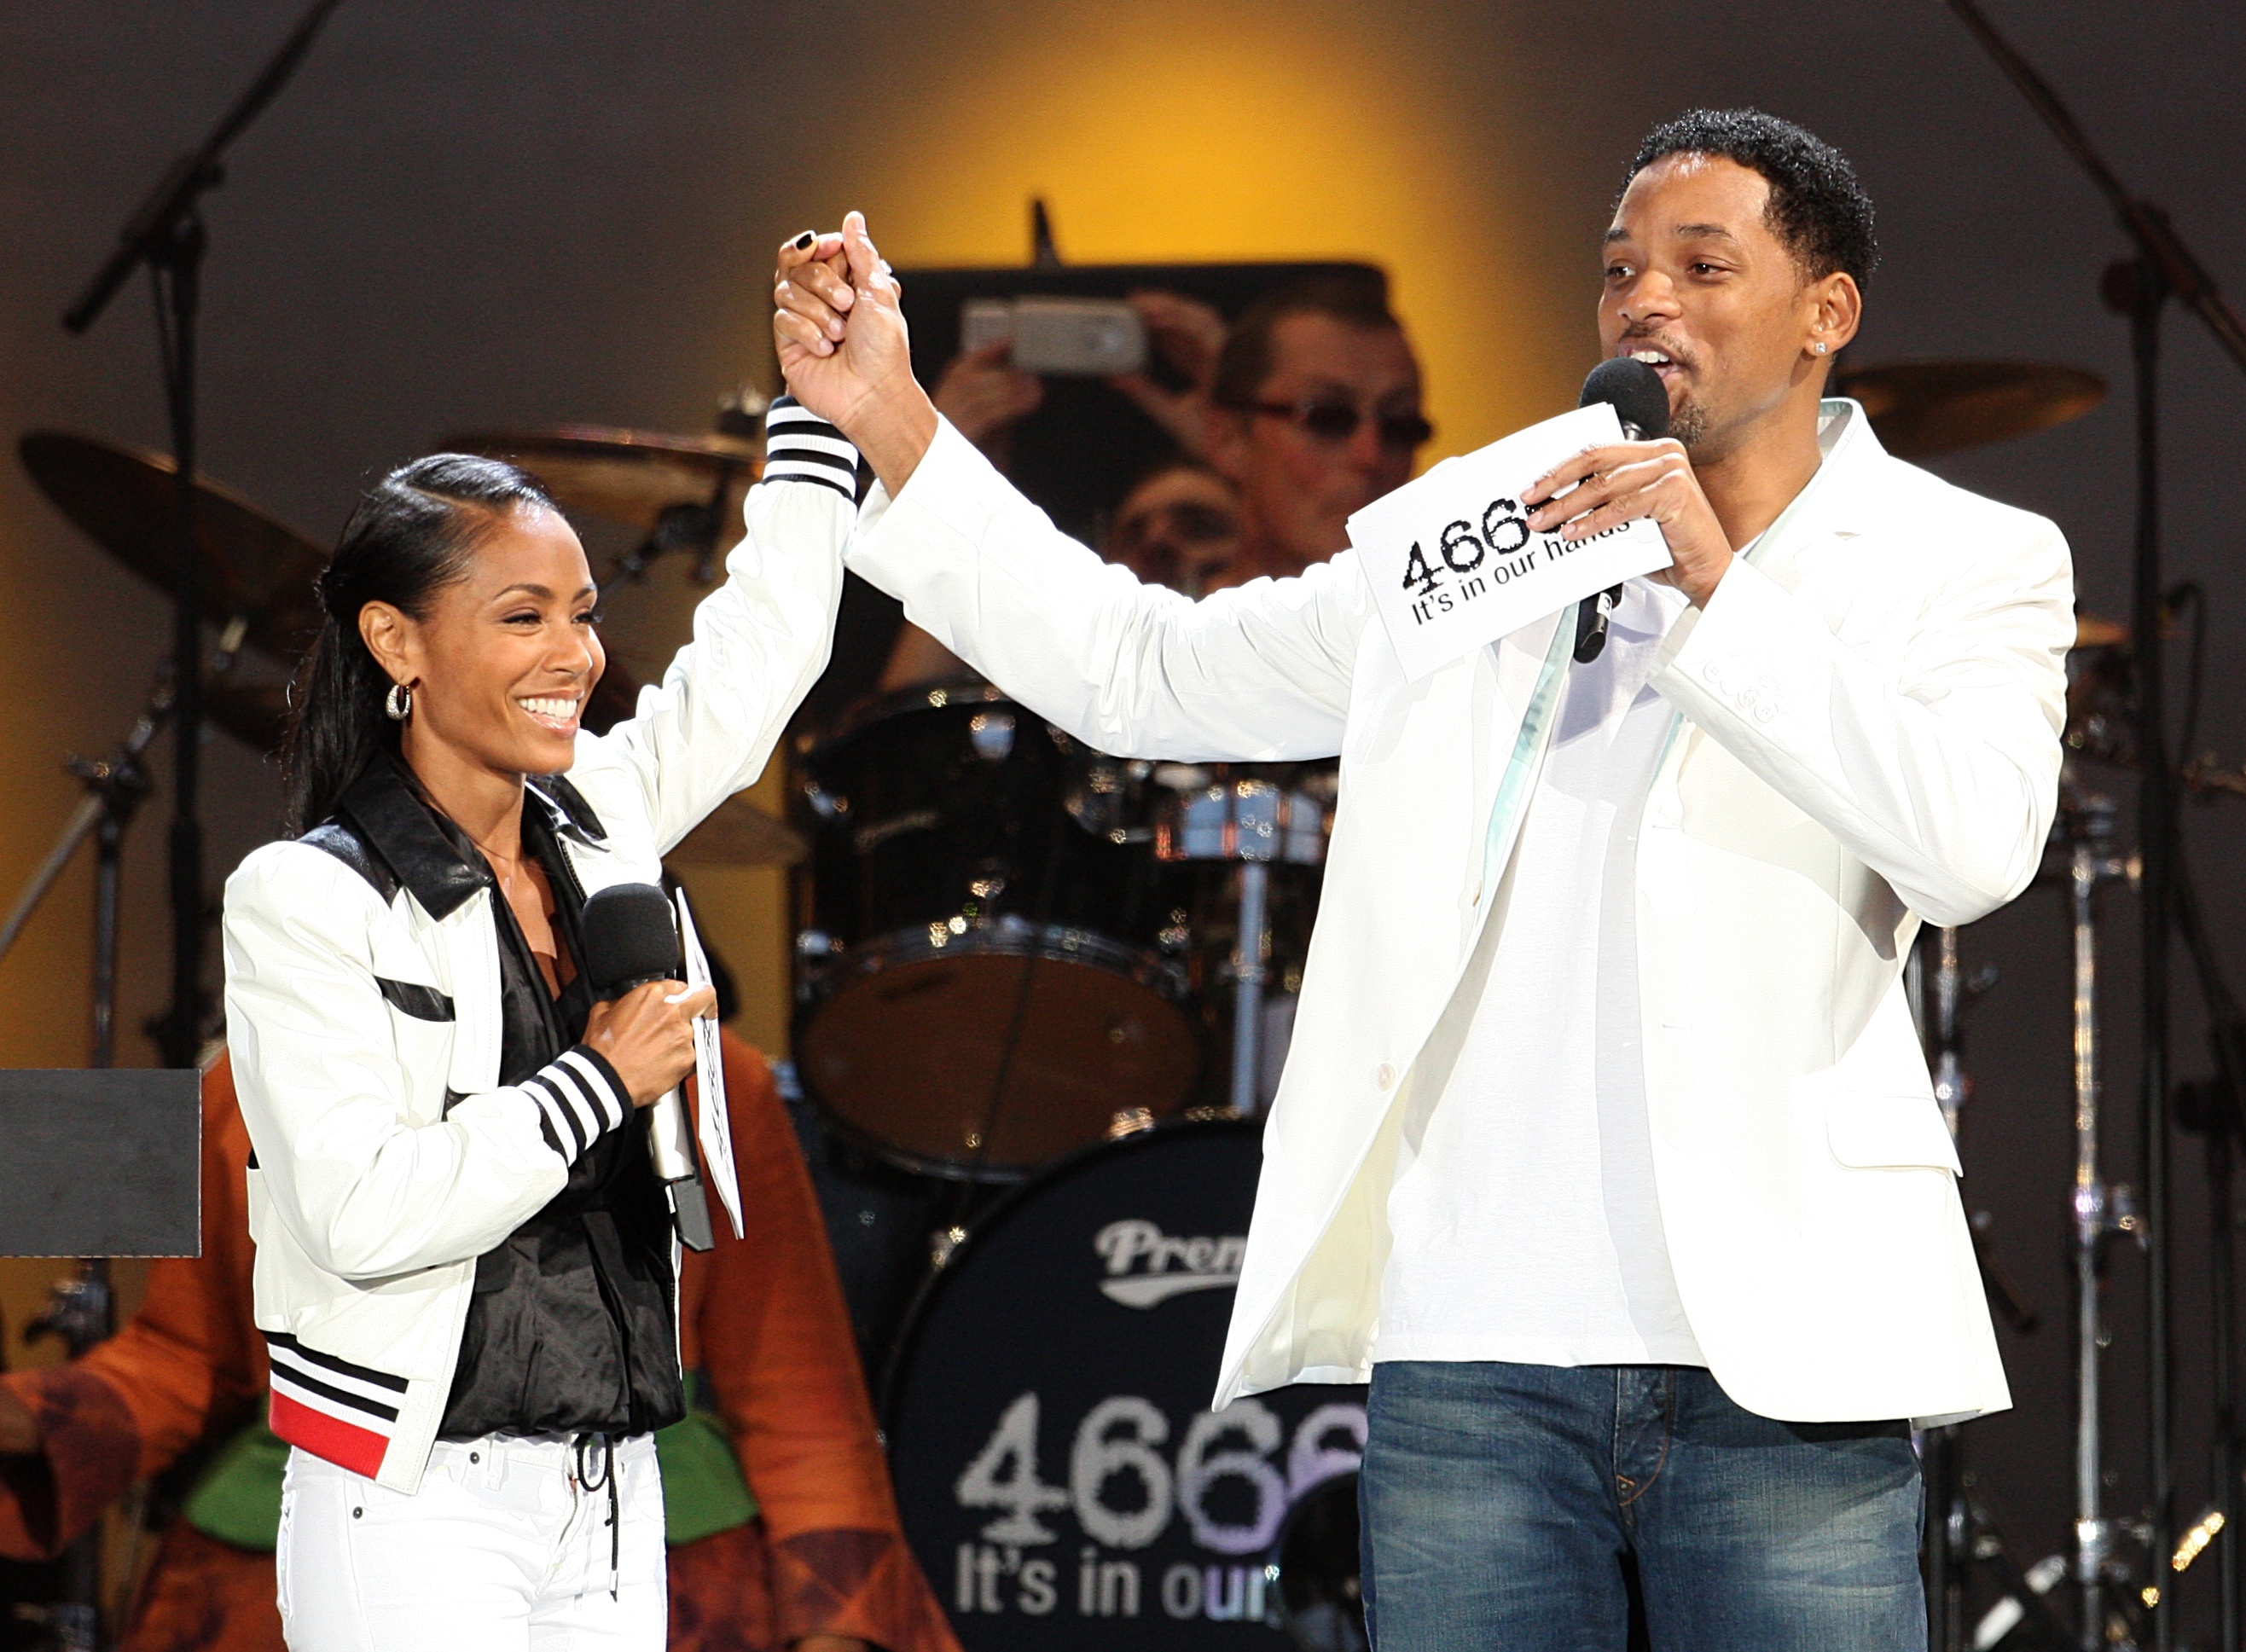 Will Smith and wife Jada Pinkett Smith on stage together